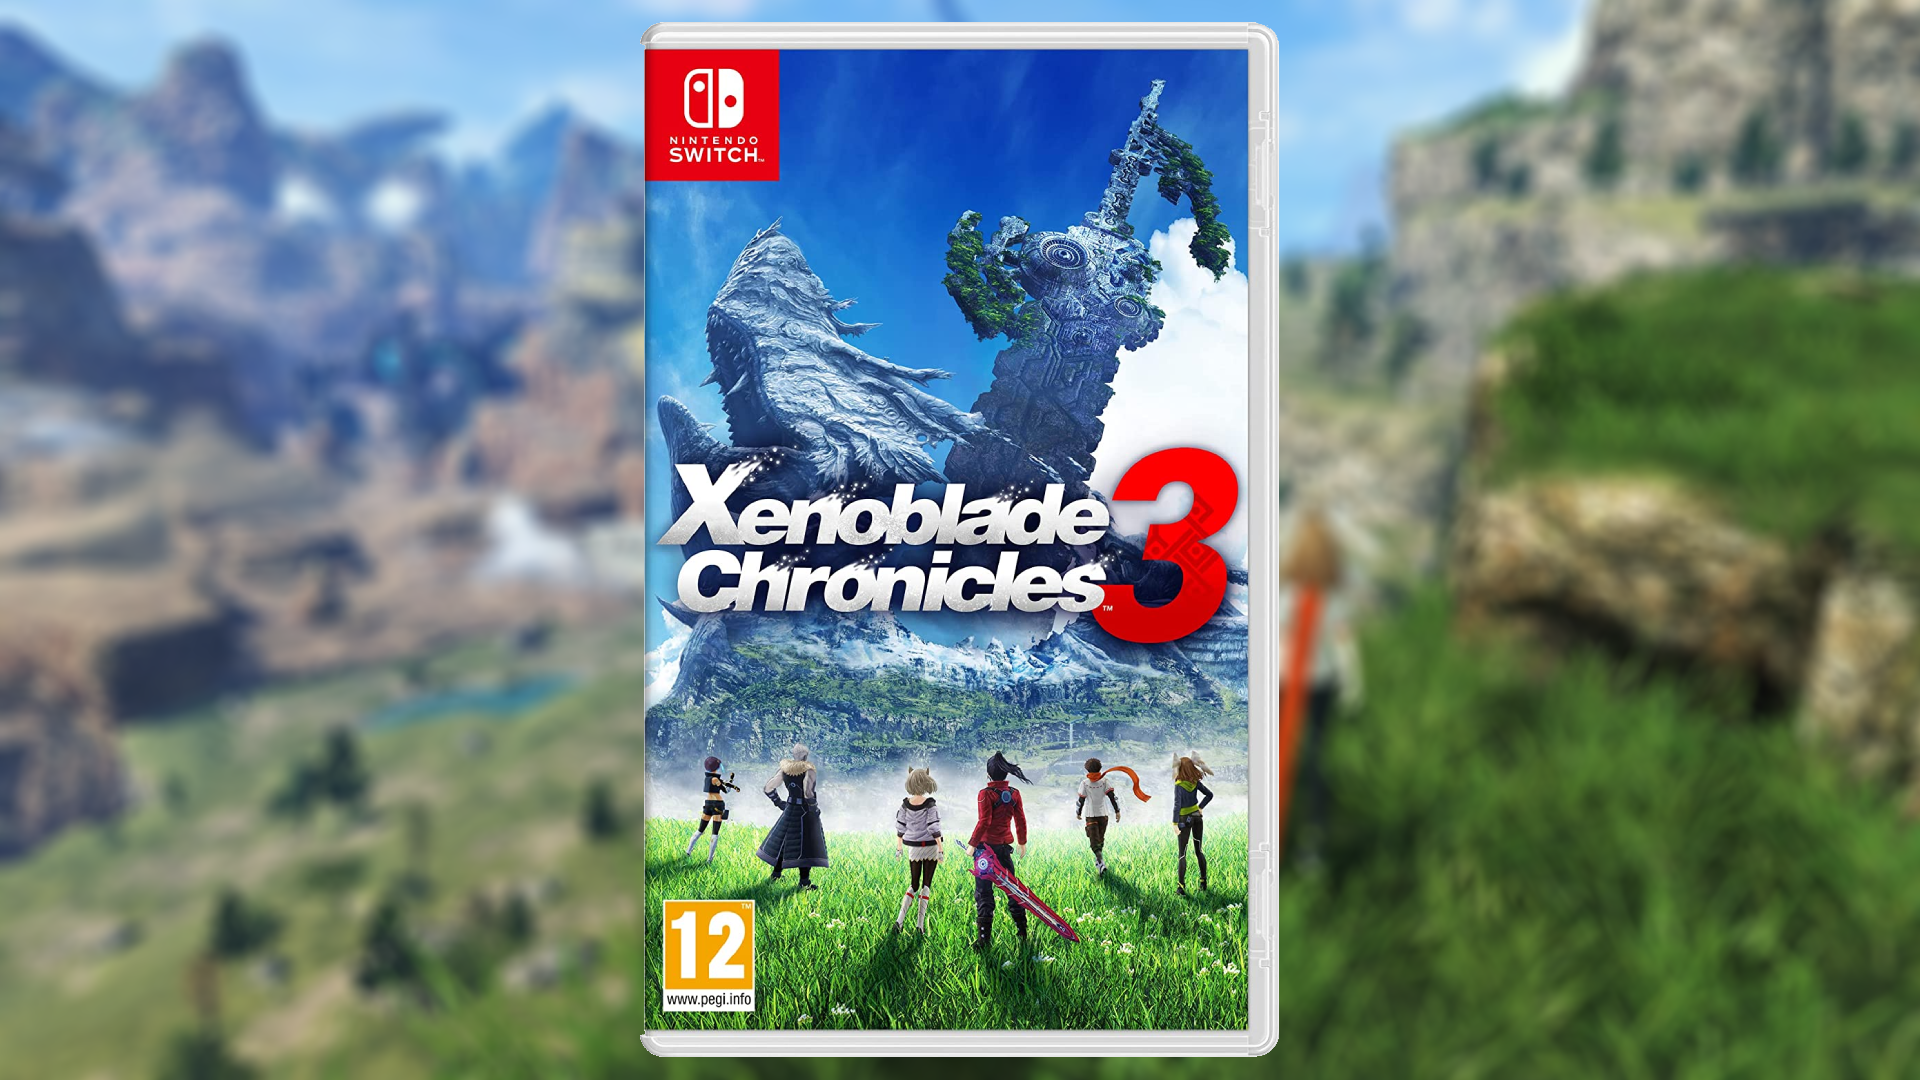 Image for Here's where you can buy Xenoblade Chronicles 3